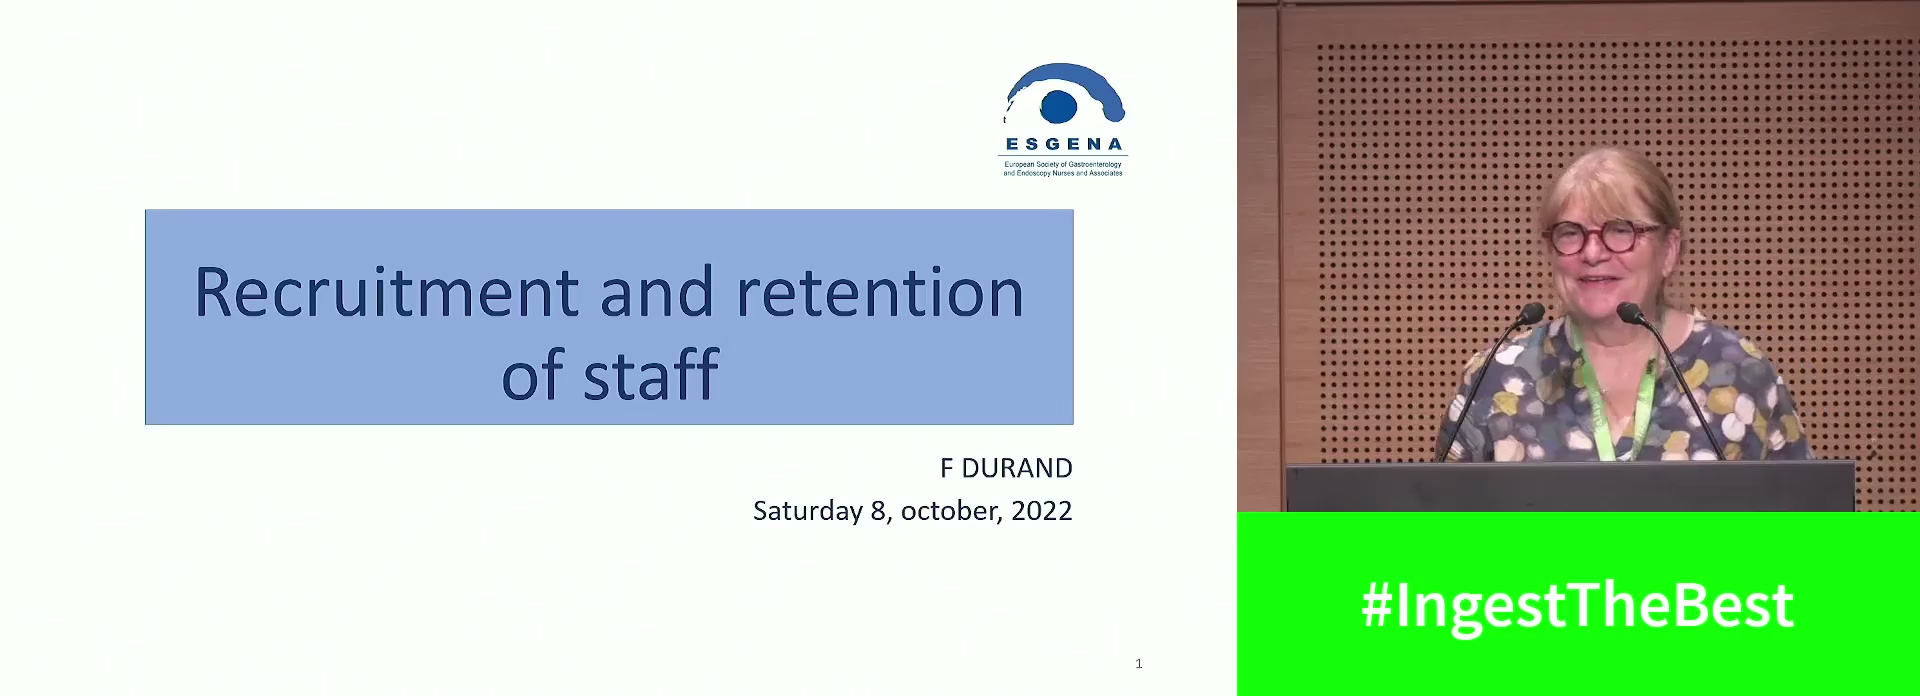 Recruitment and retention of staff